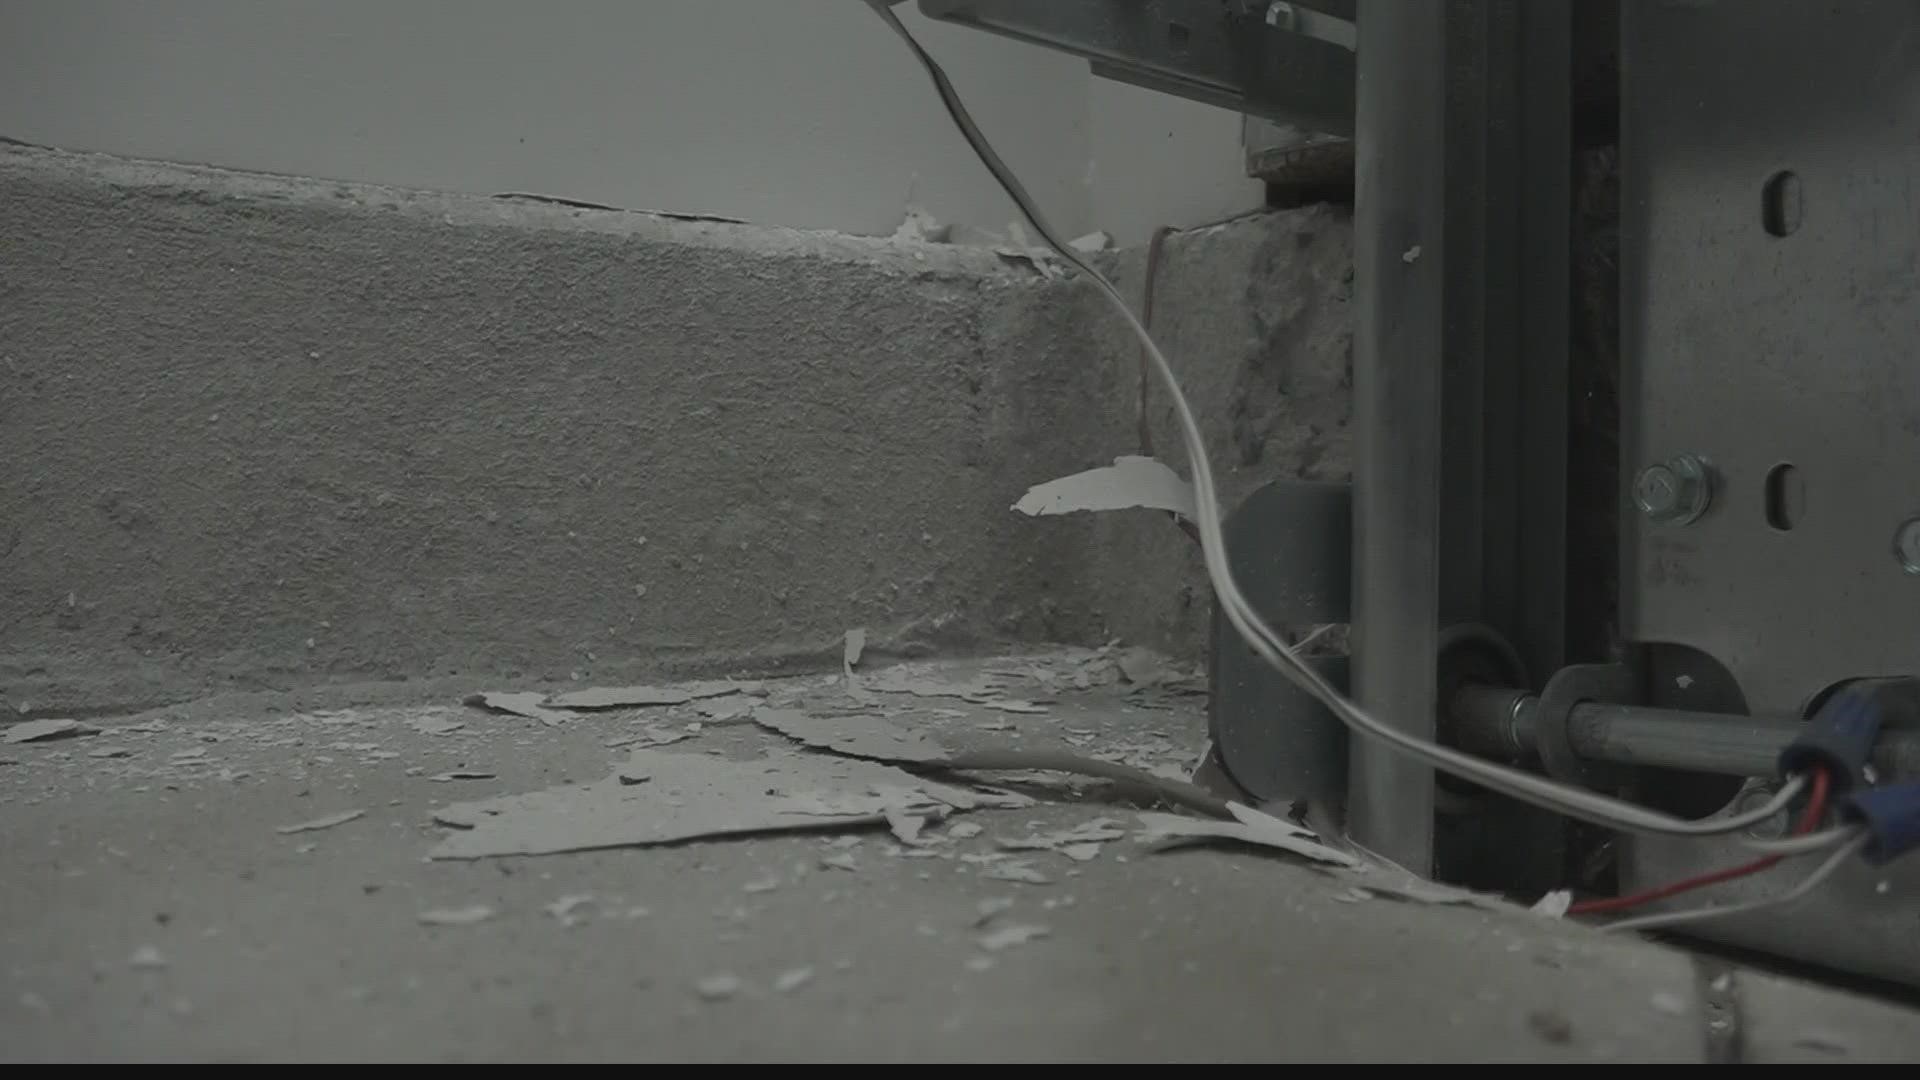 Crooked windows and outlets, chipped paint, and cracks in the concrete are issues a Fernandina Beach homeowner has been trying to get fixed for more than two months.